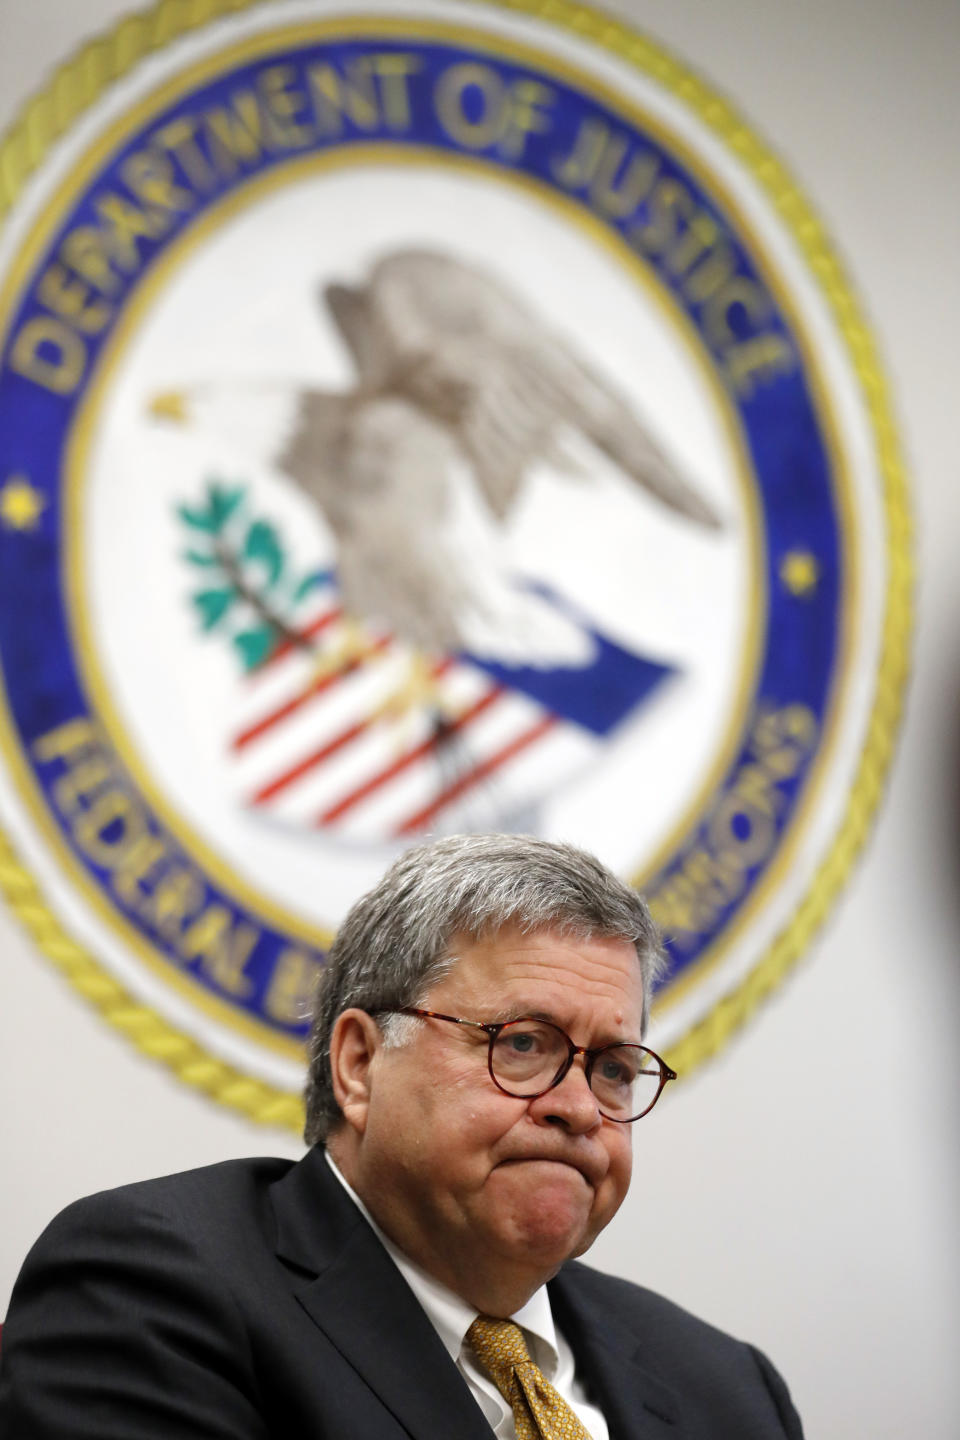 Attorney General William Barr speaks during a tour of a federal prison Monday, July 8, 2019, in Edgefield, S.C. (AP Photo/John Bazemore)